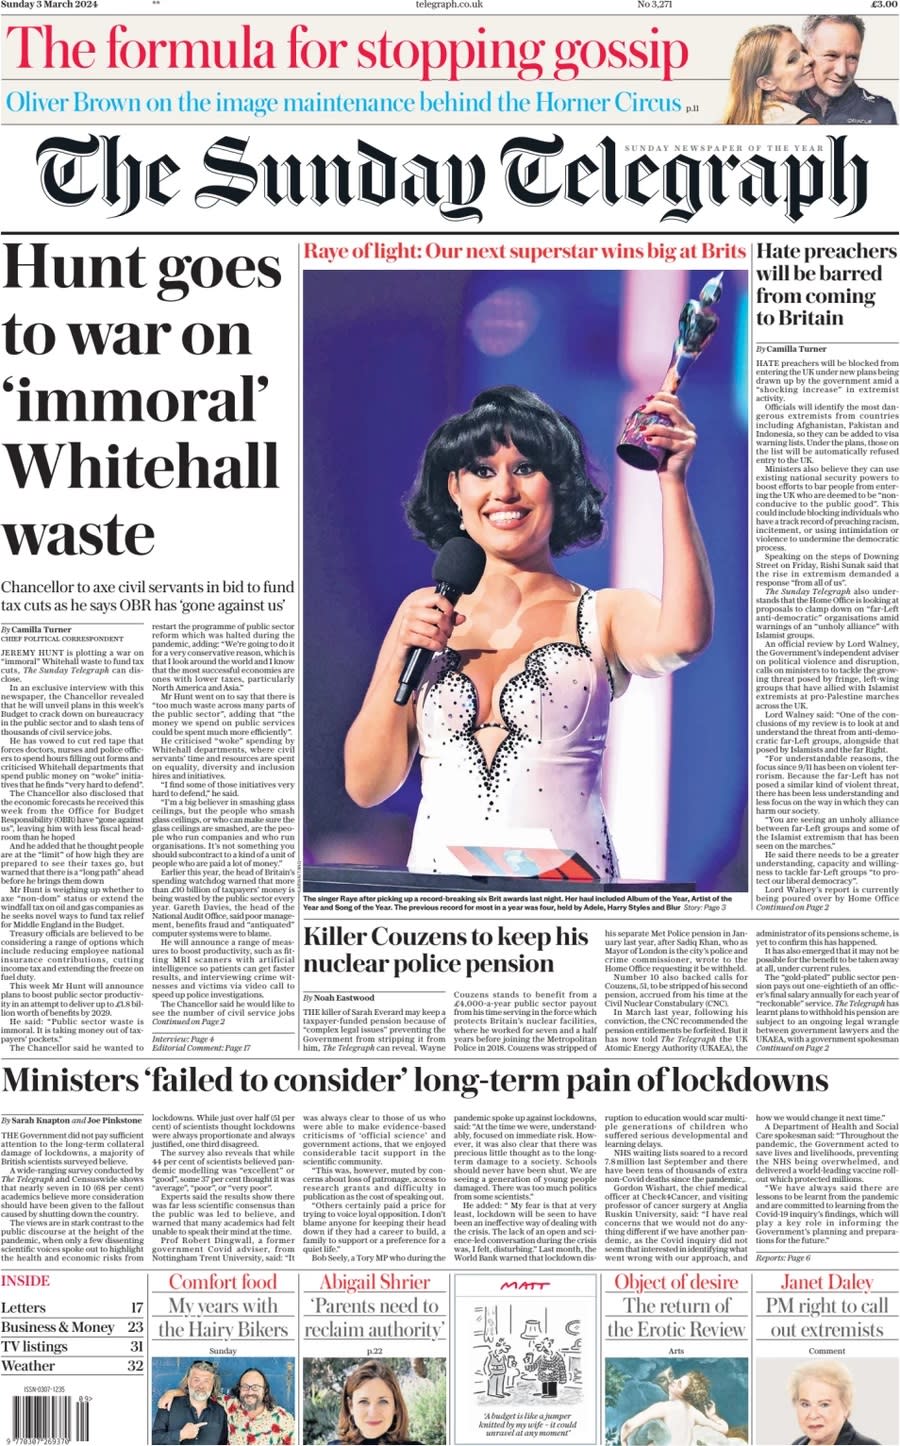 03/03/2024 Sunday Telegraph front page